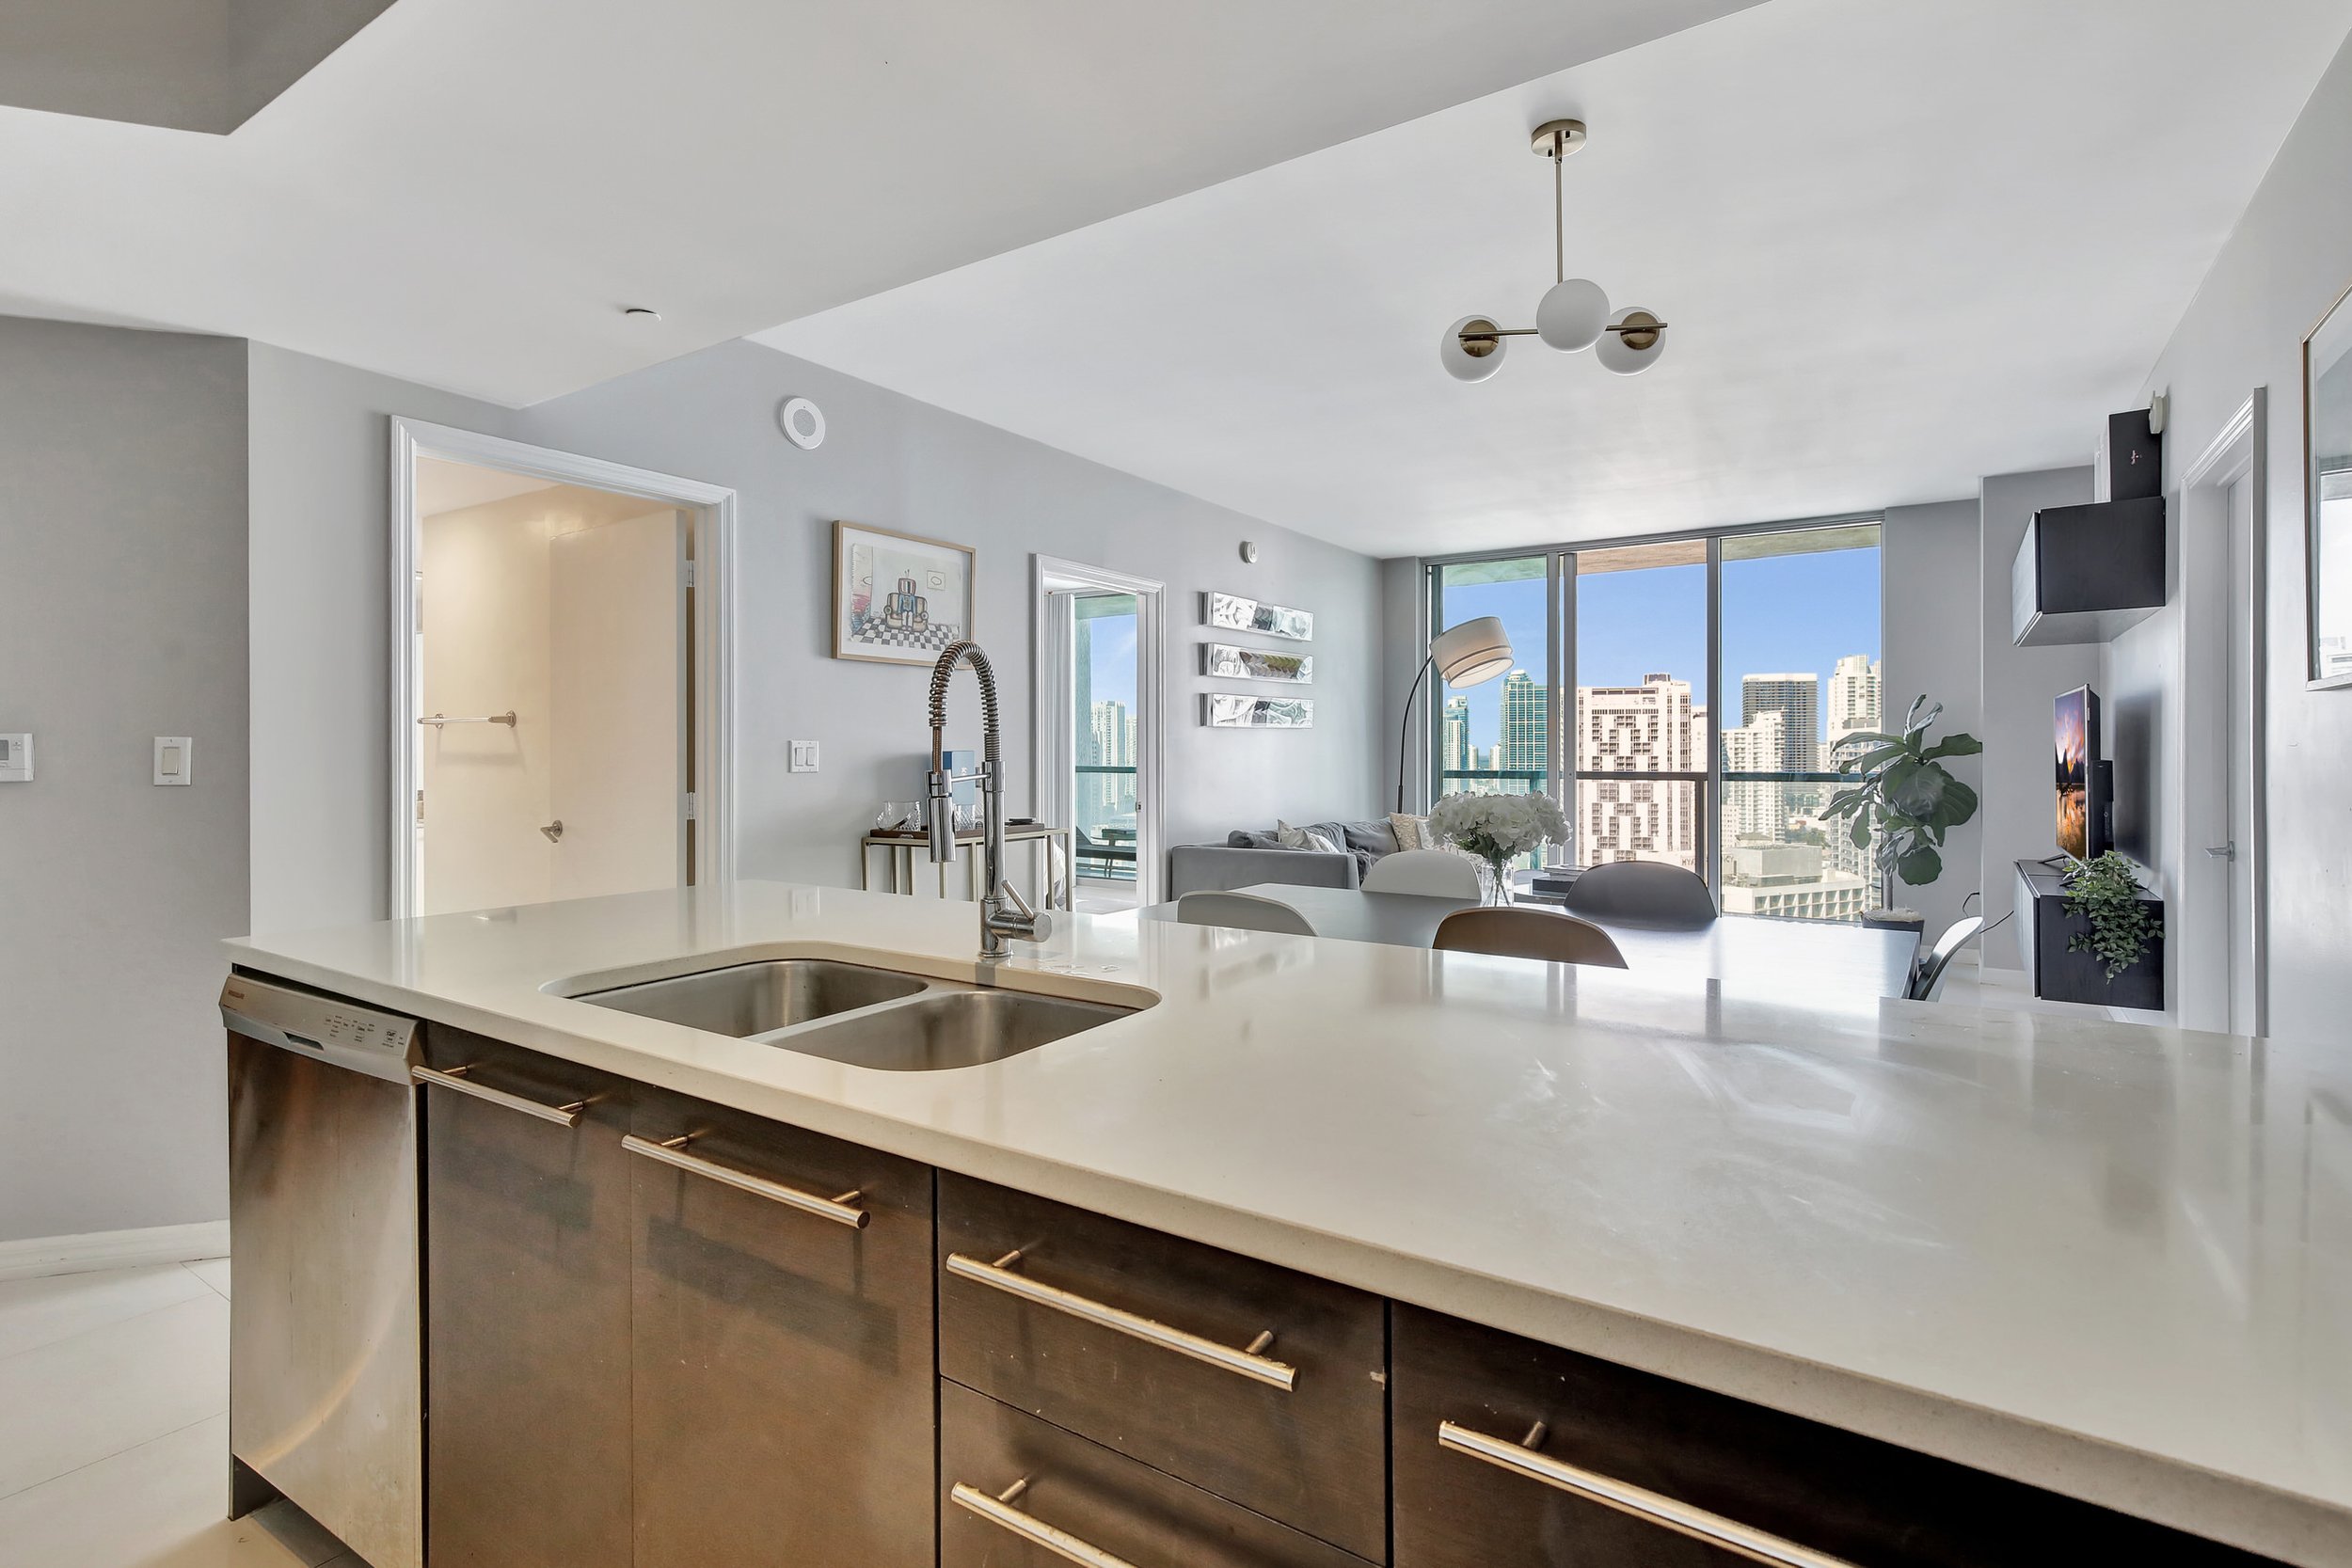 Check Out This Two-Bedroom Condo For Under $900K In Brickell 27.jpg